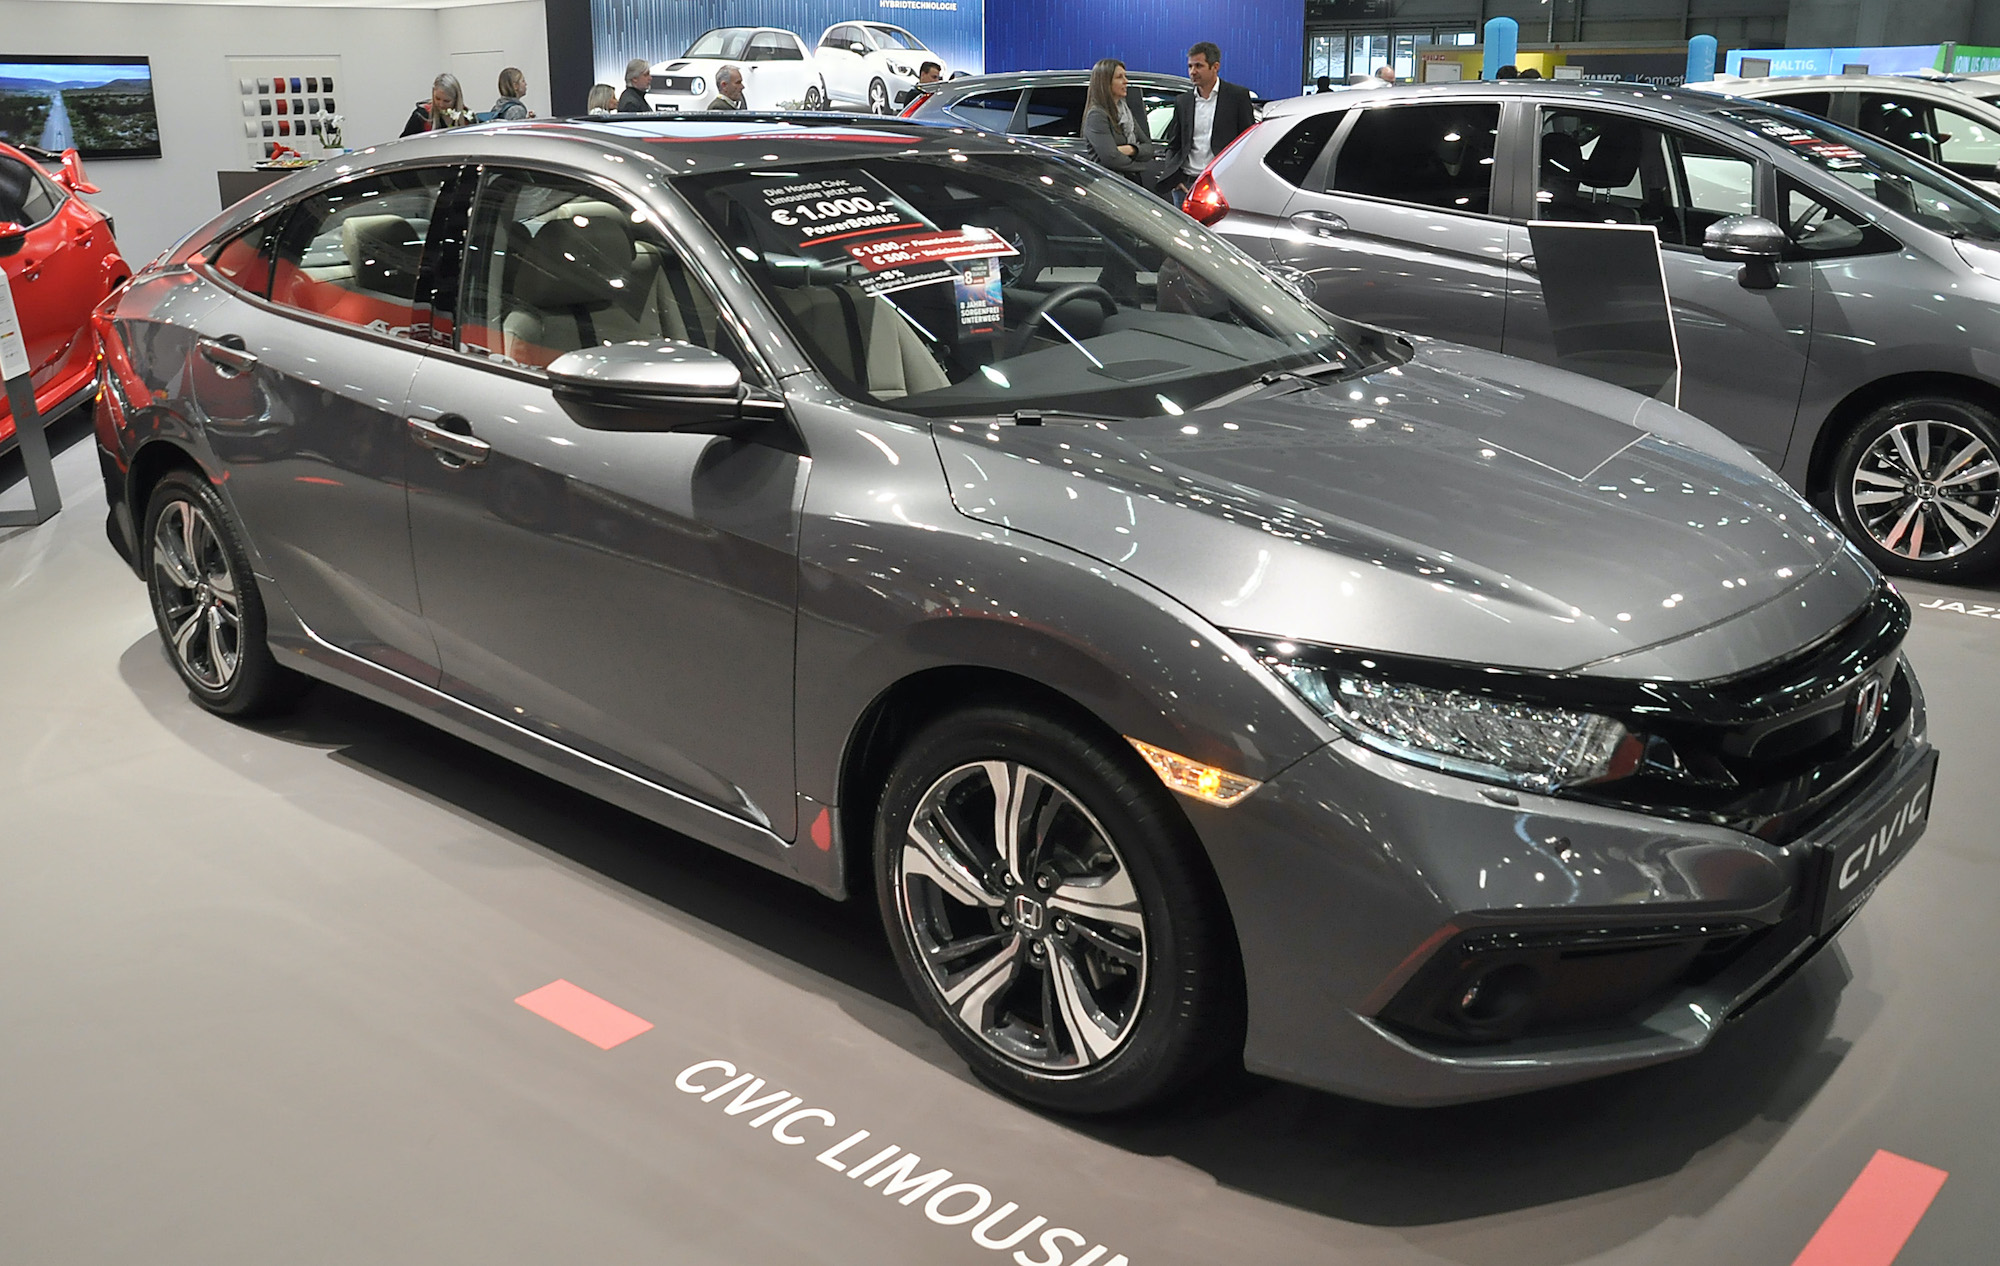 A non-luxury car, the Honda Civic Limousine, is seen during the Vienna Car Show press preview at Messe Wien